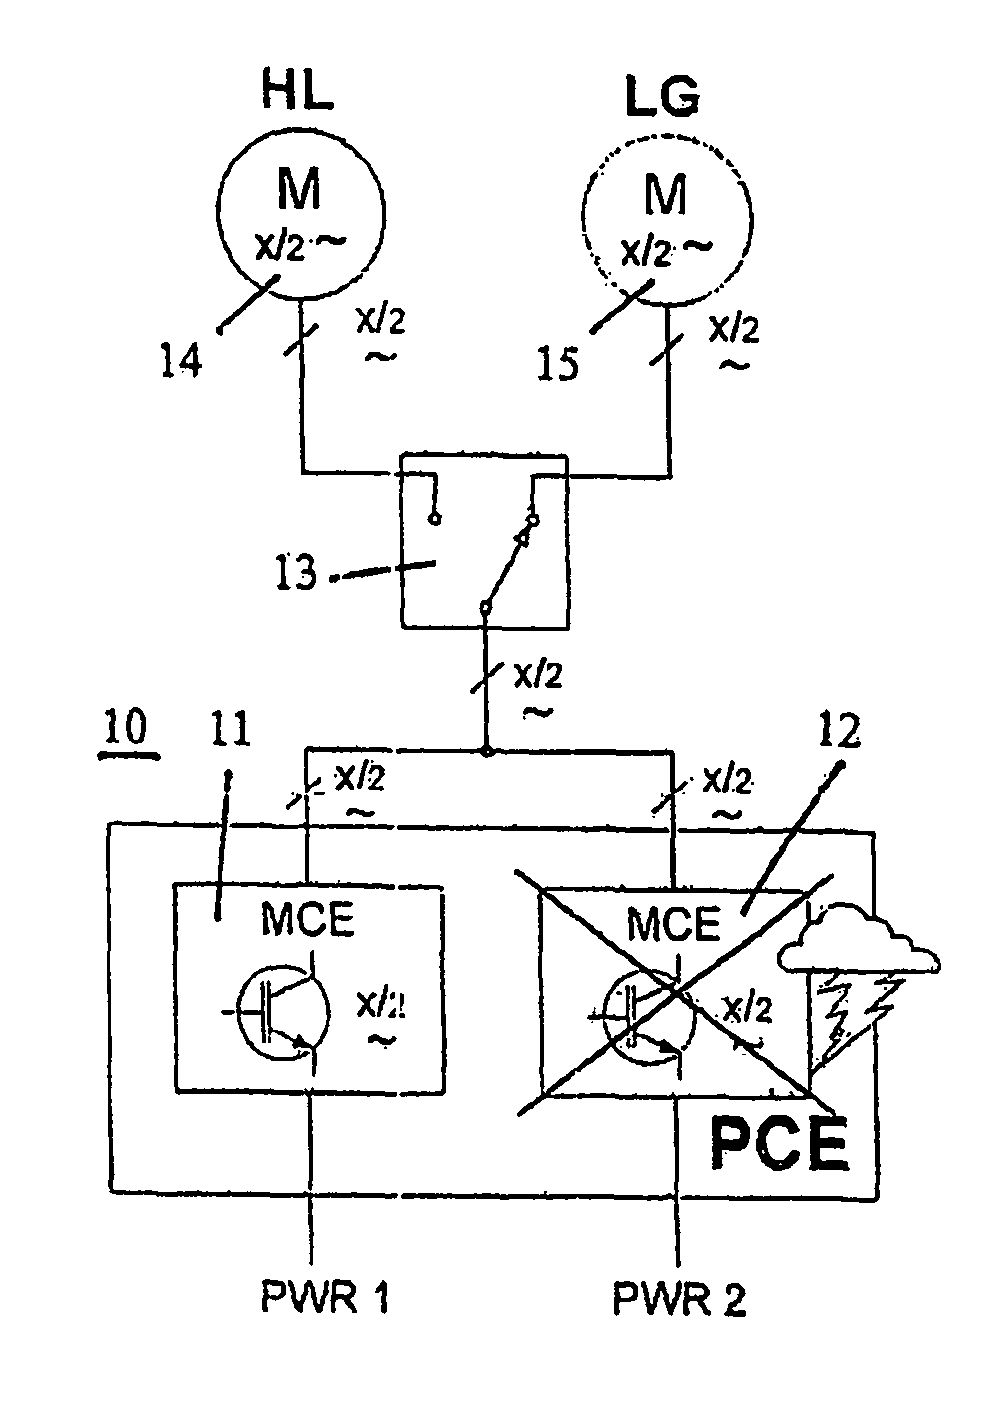 Method and device for redundantly supplying several electric servomotors or drive motors by means of a common power electronics unit